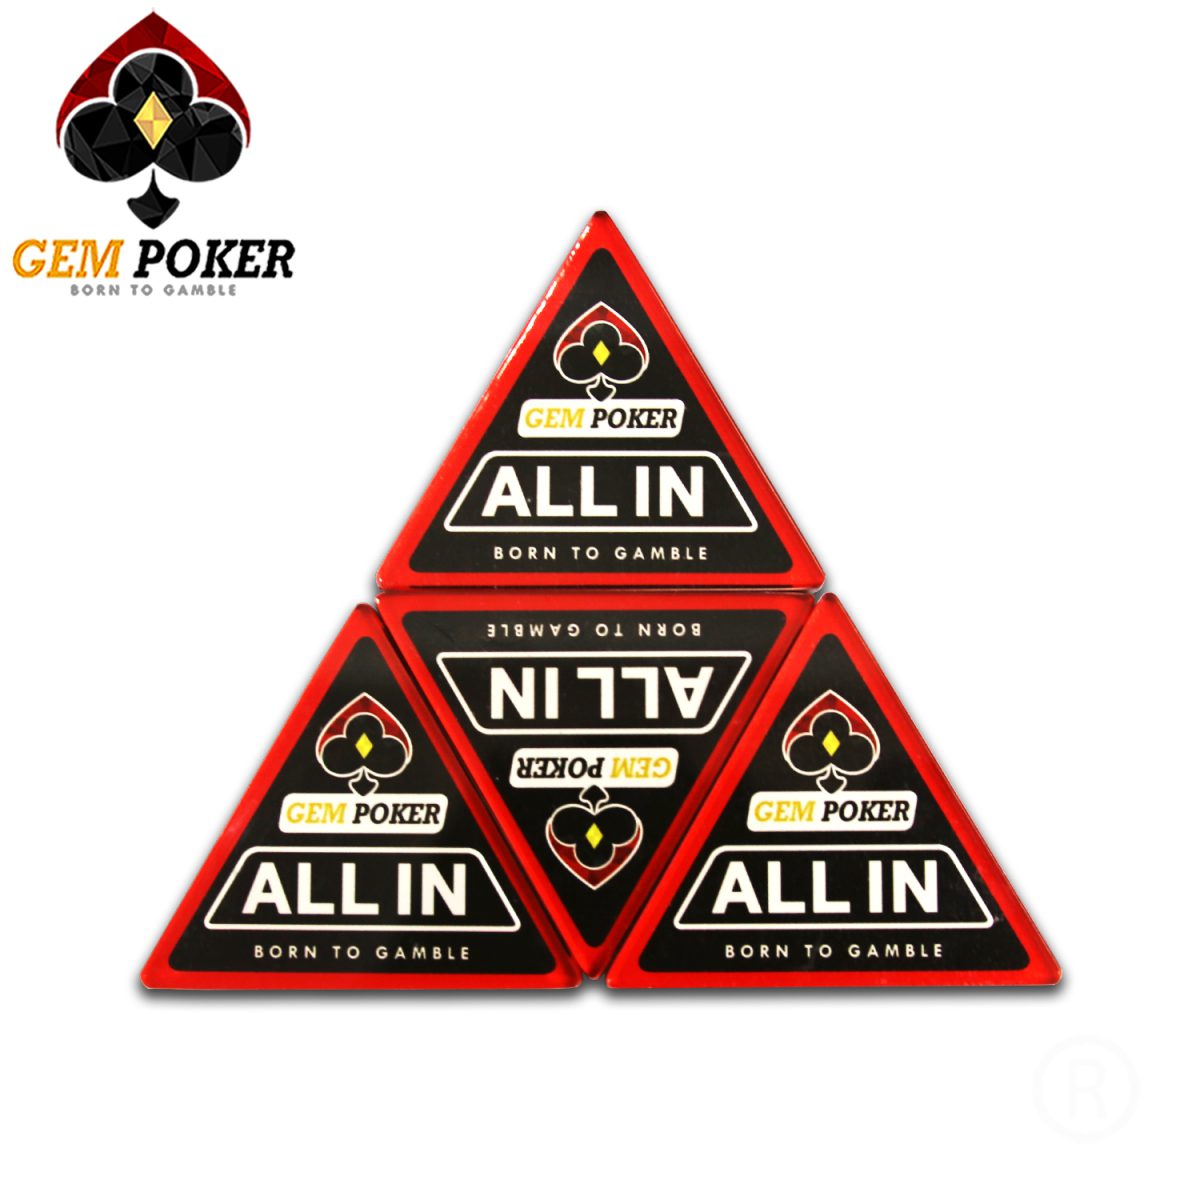 ALL-IN BUTTON GEMPOKER - 01